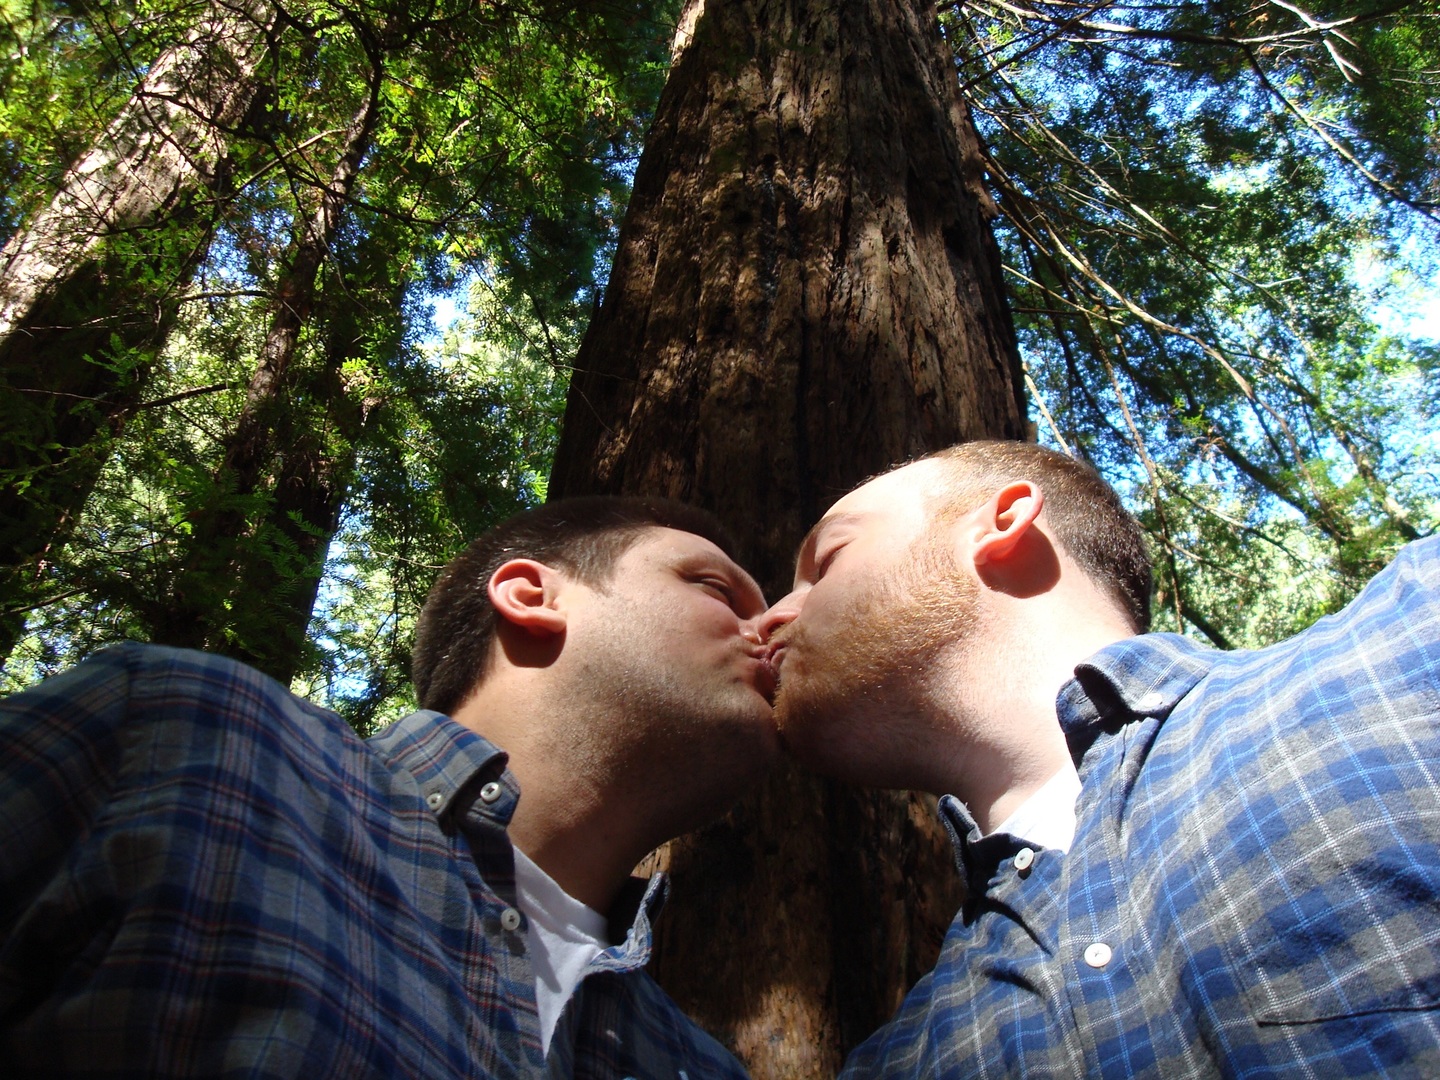 Two men kissing under a large tree within a forest